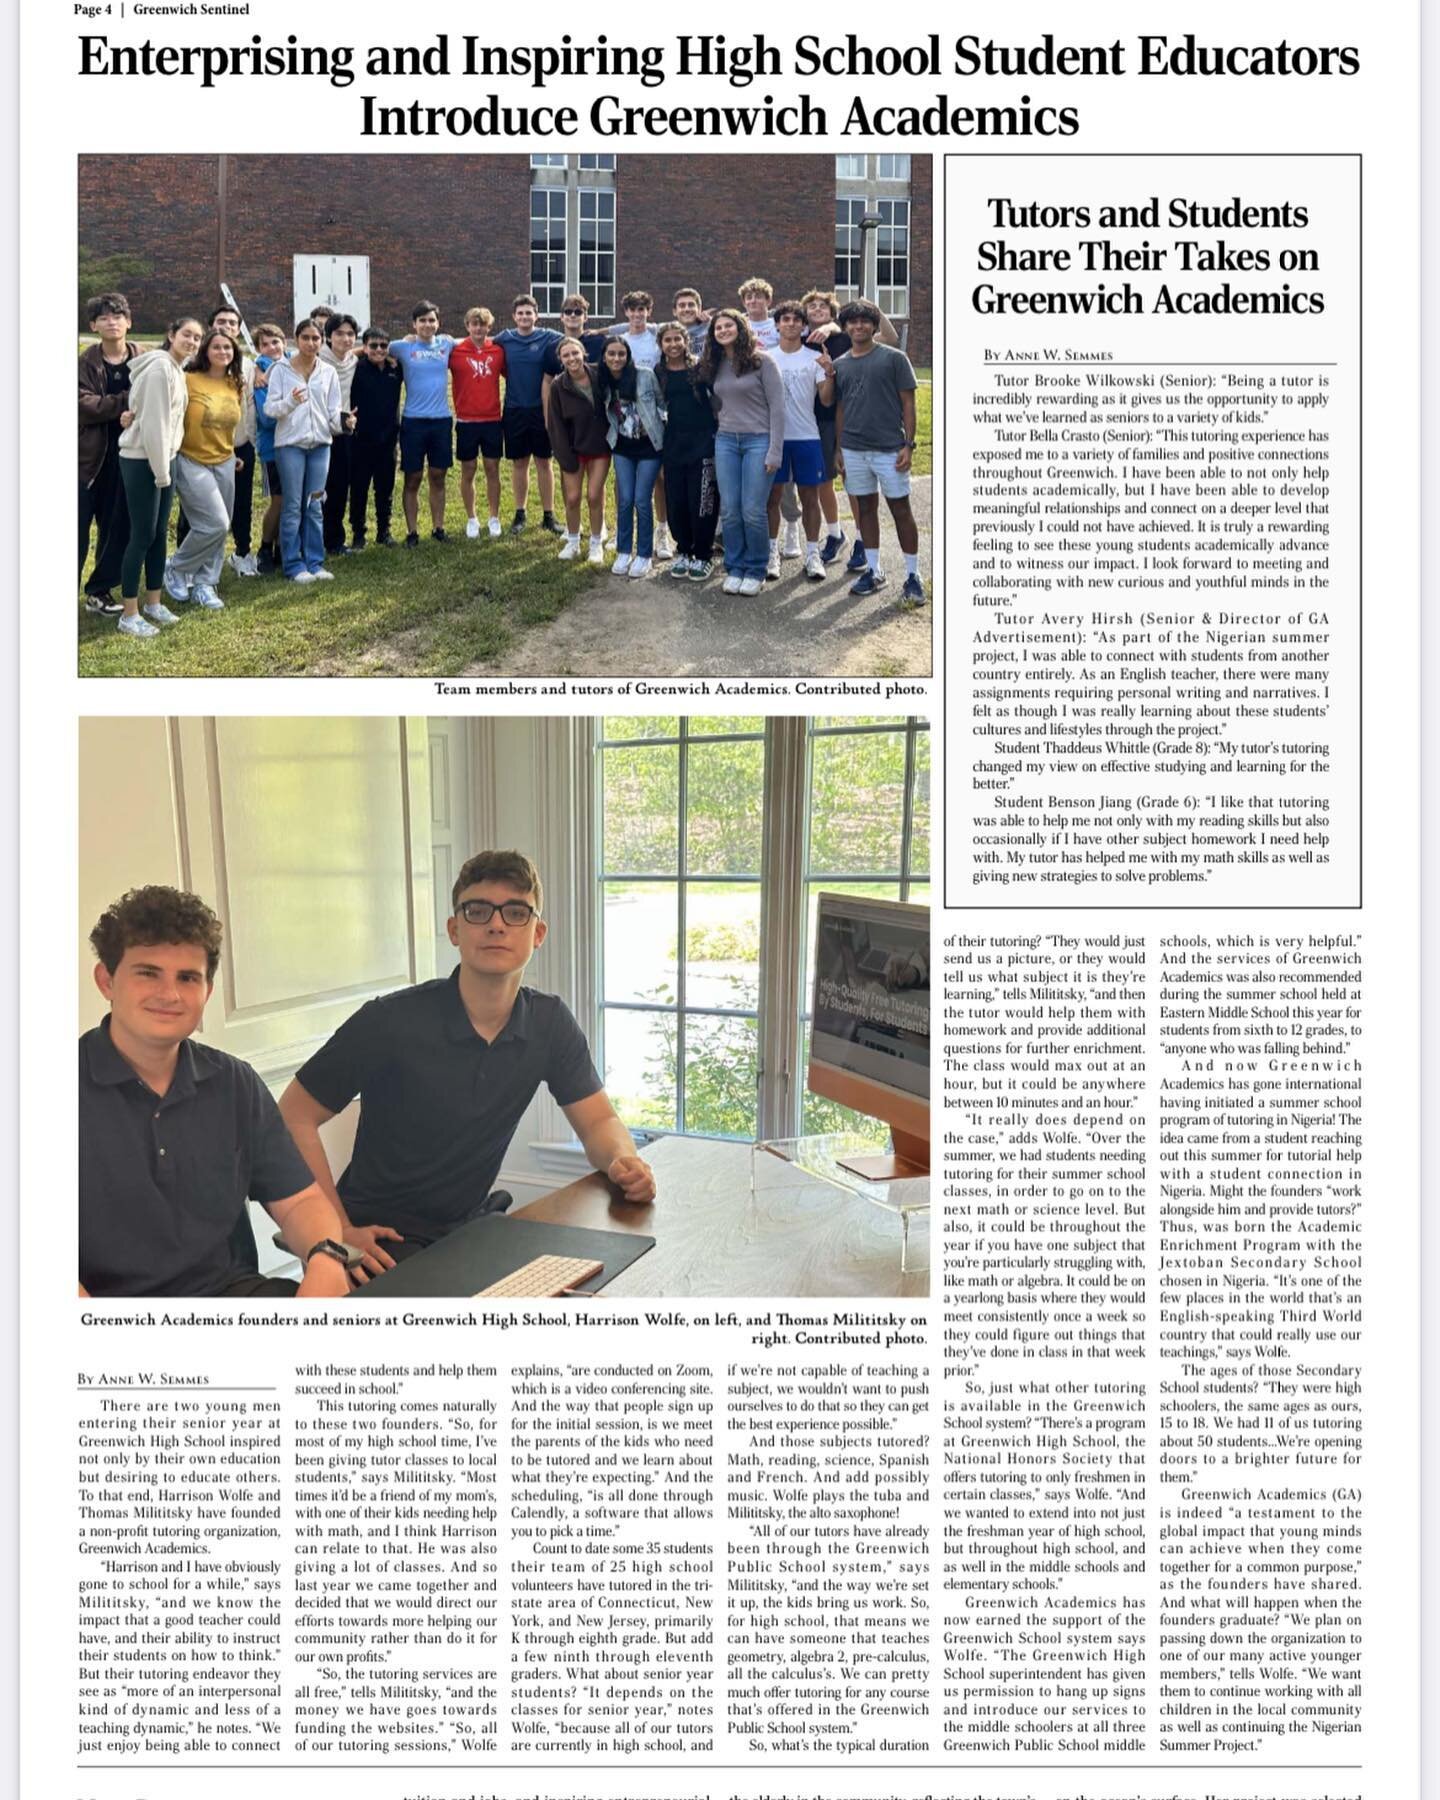 Thank you to the Greenwich Sentinel for this article about our organization!